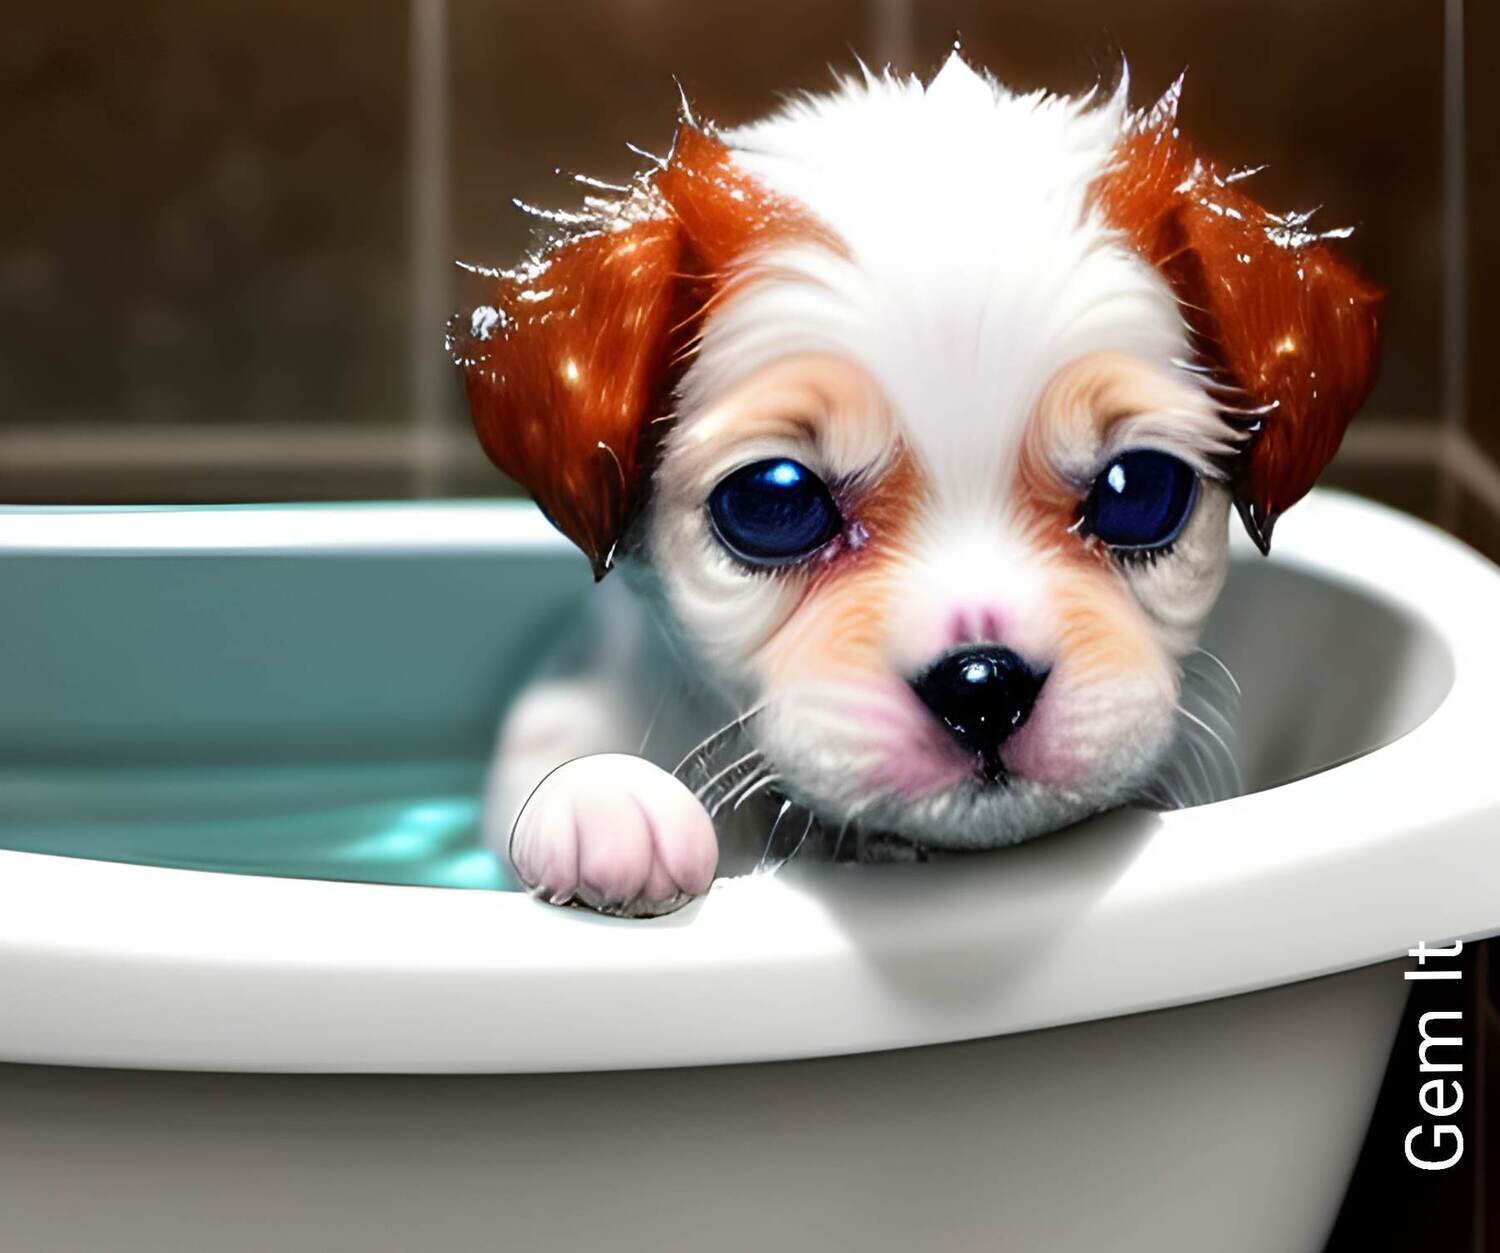 Wet Puppy - Specially ordered for you. Delivery is approximately 4 - 6 weeks.